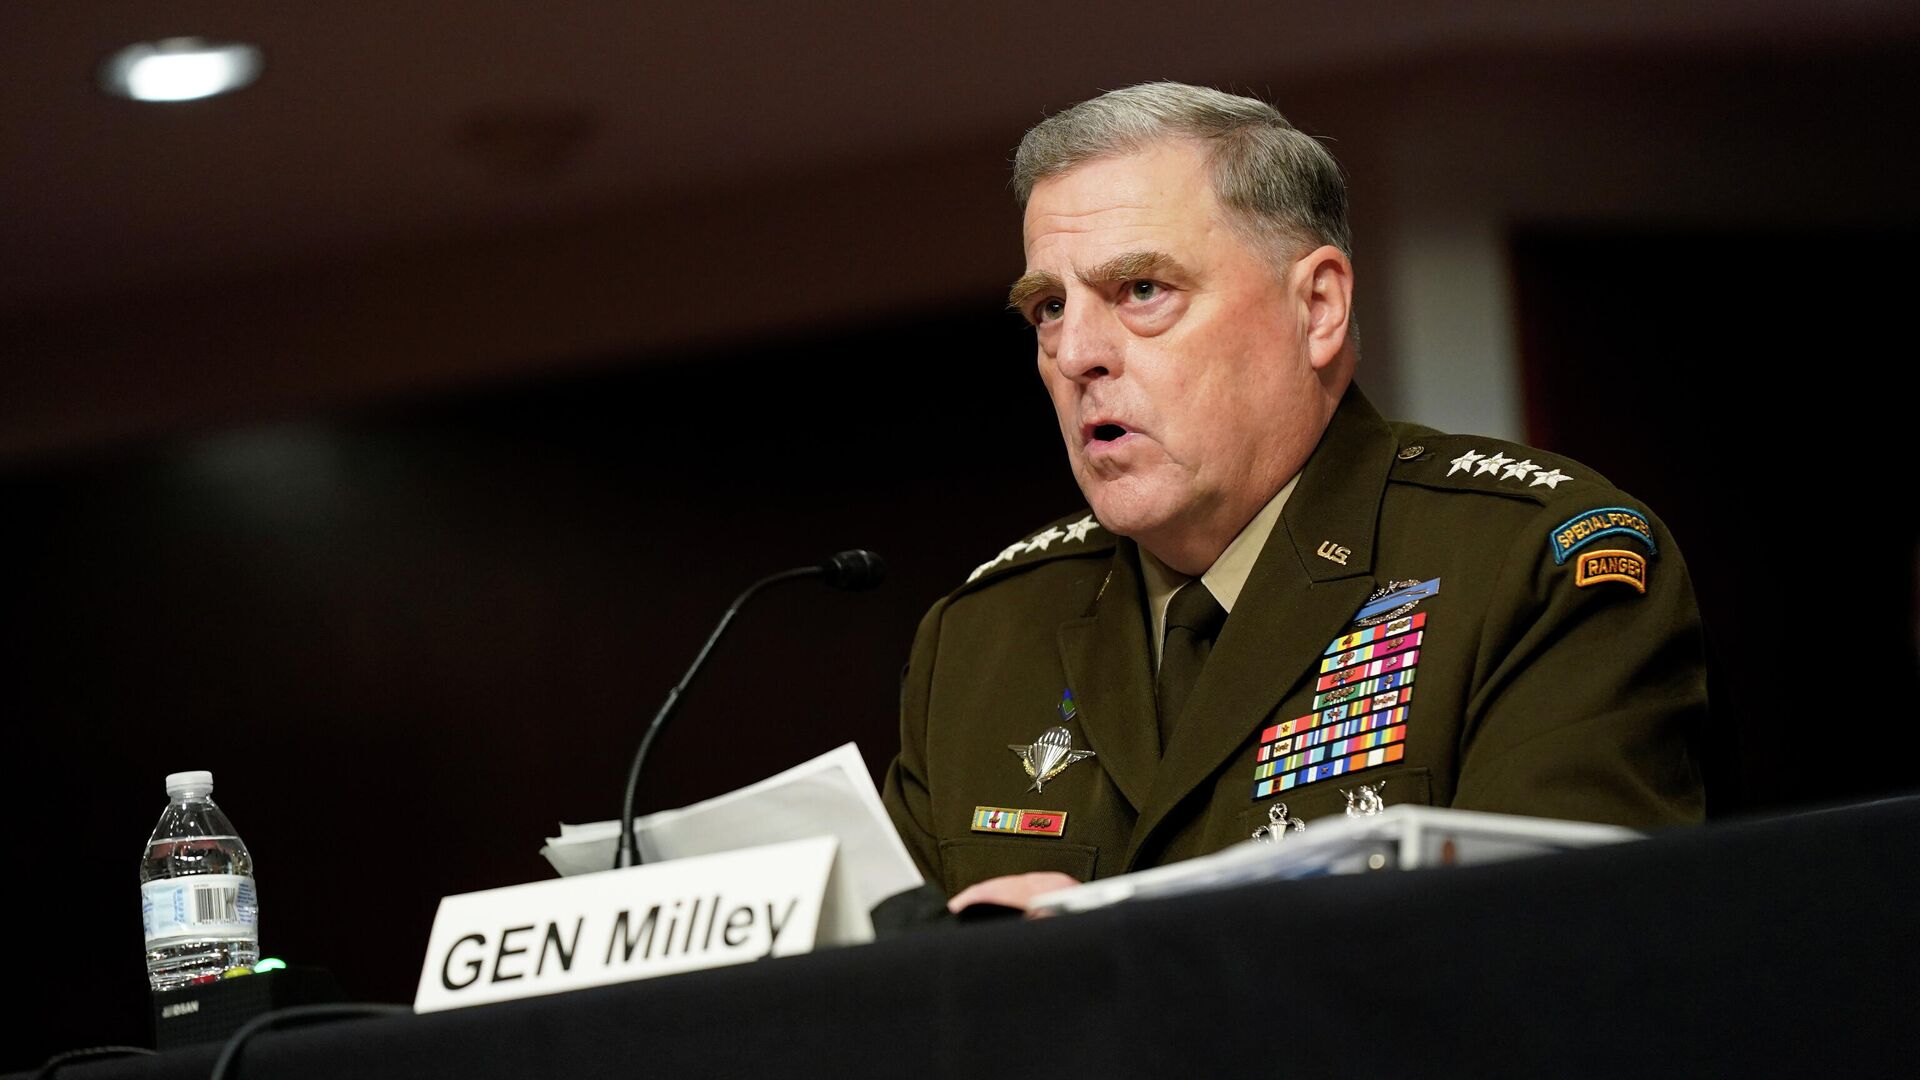 Chairman of the Joint Chiefs of Staff General Mark Milley speaks during a Senate Armed Services Committee hearing on the conclusion of military operations in Afghanistan and plans for future counterterrorism operations, on Capitol Hill in Washington, U.S., September 28, 2021. - Sputnik International, 1920, 27.10.2021